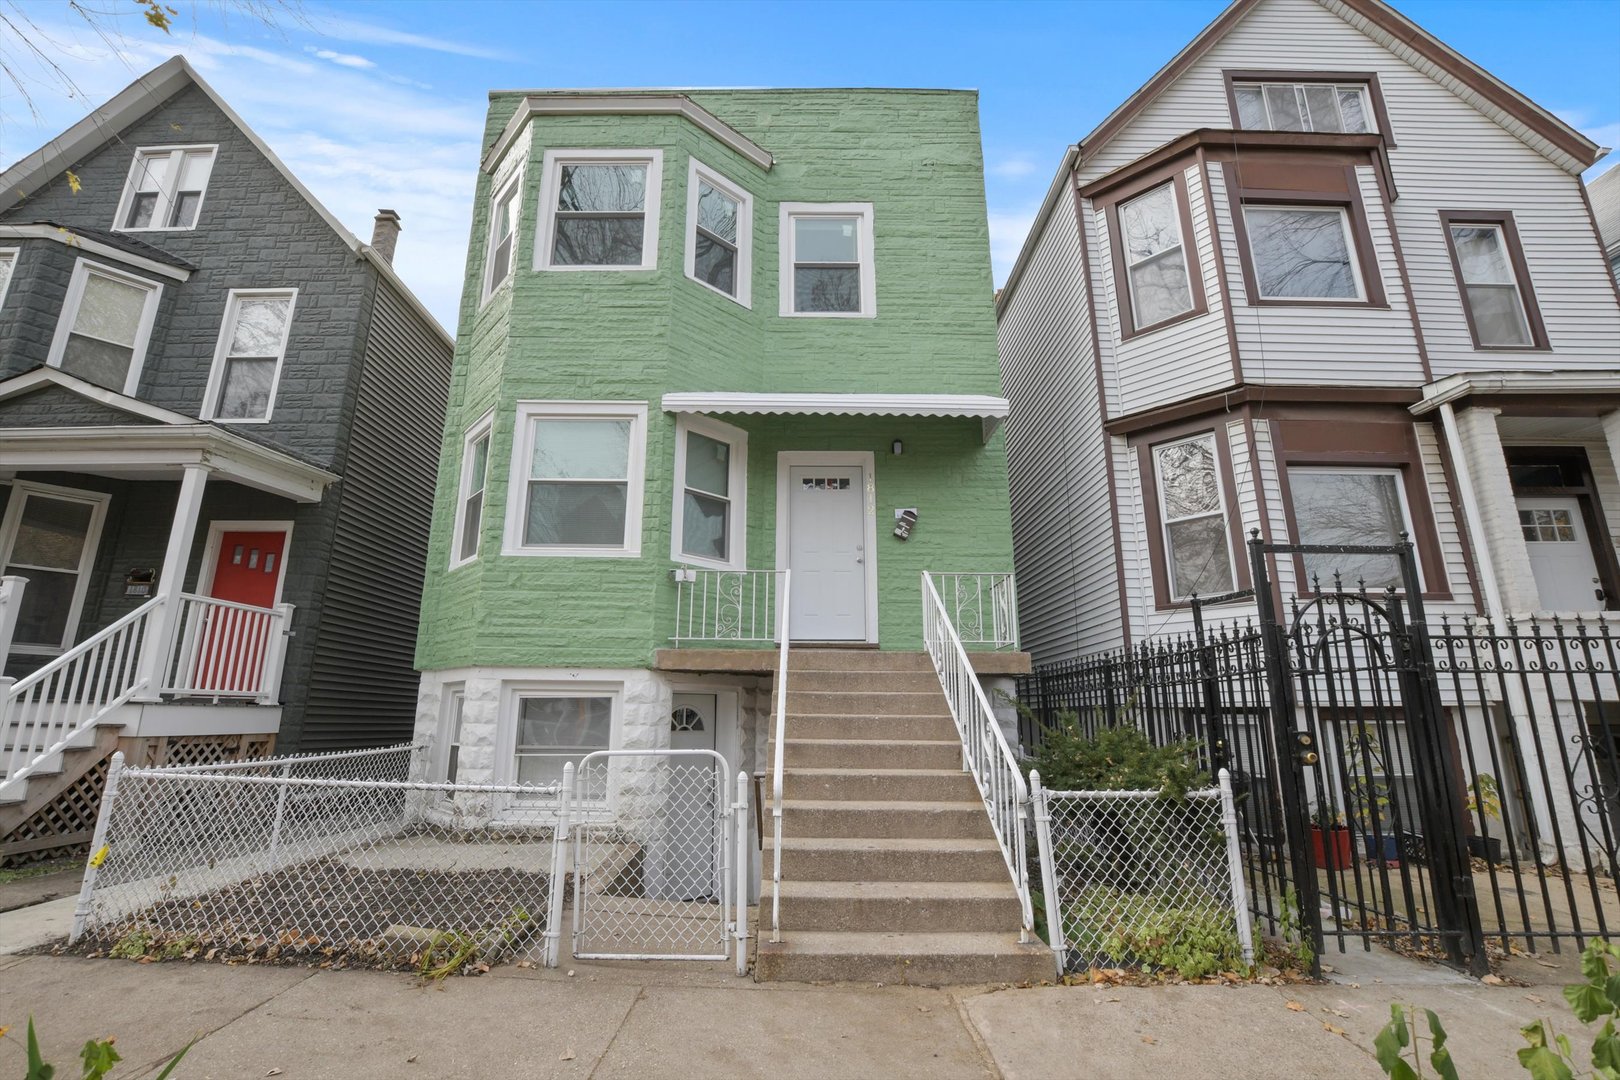 Amazing ROI potential for both owner occupied & investors in this newly renovated HOT Hermosa 3-unit